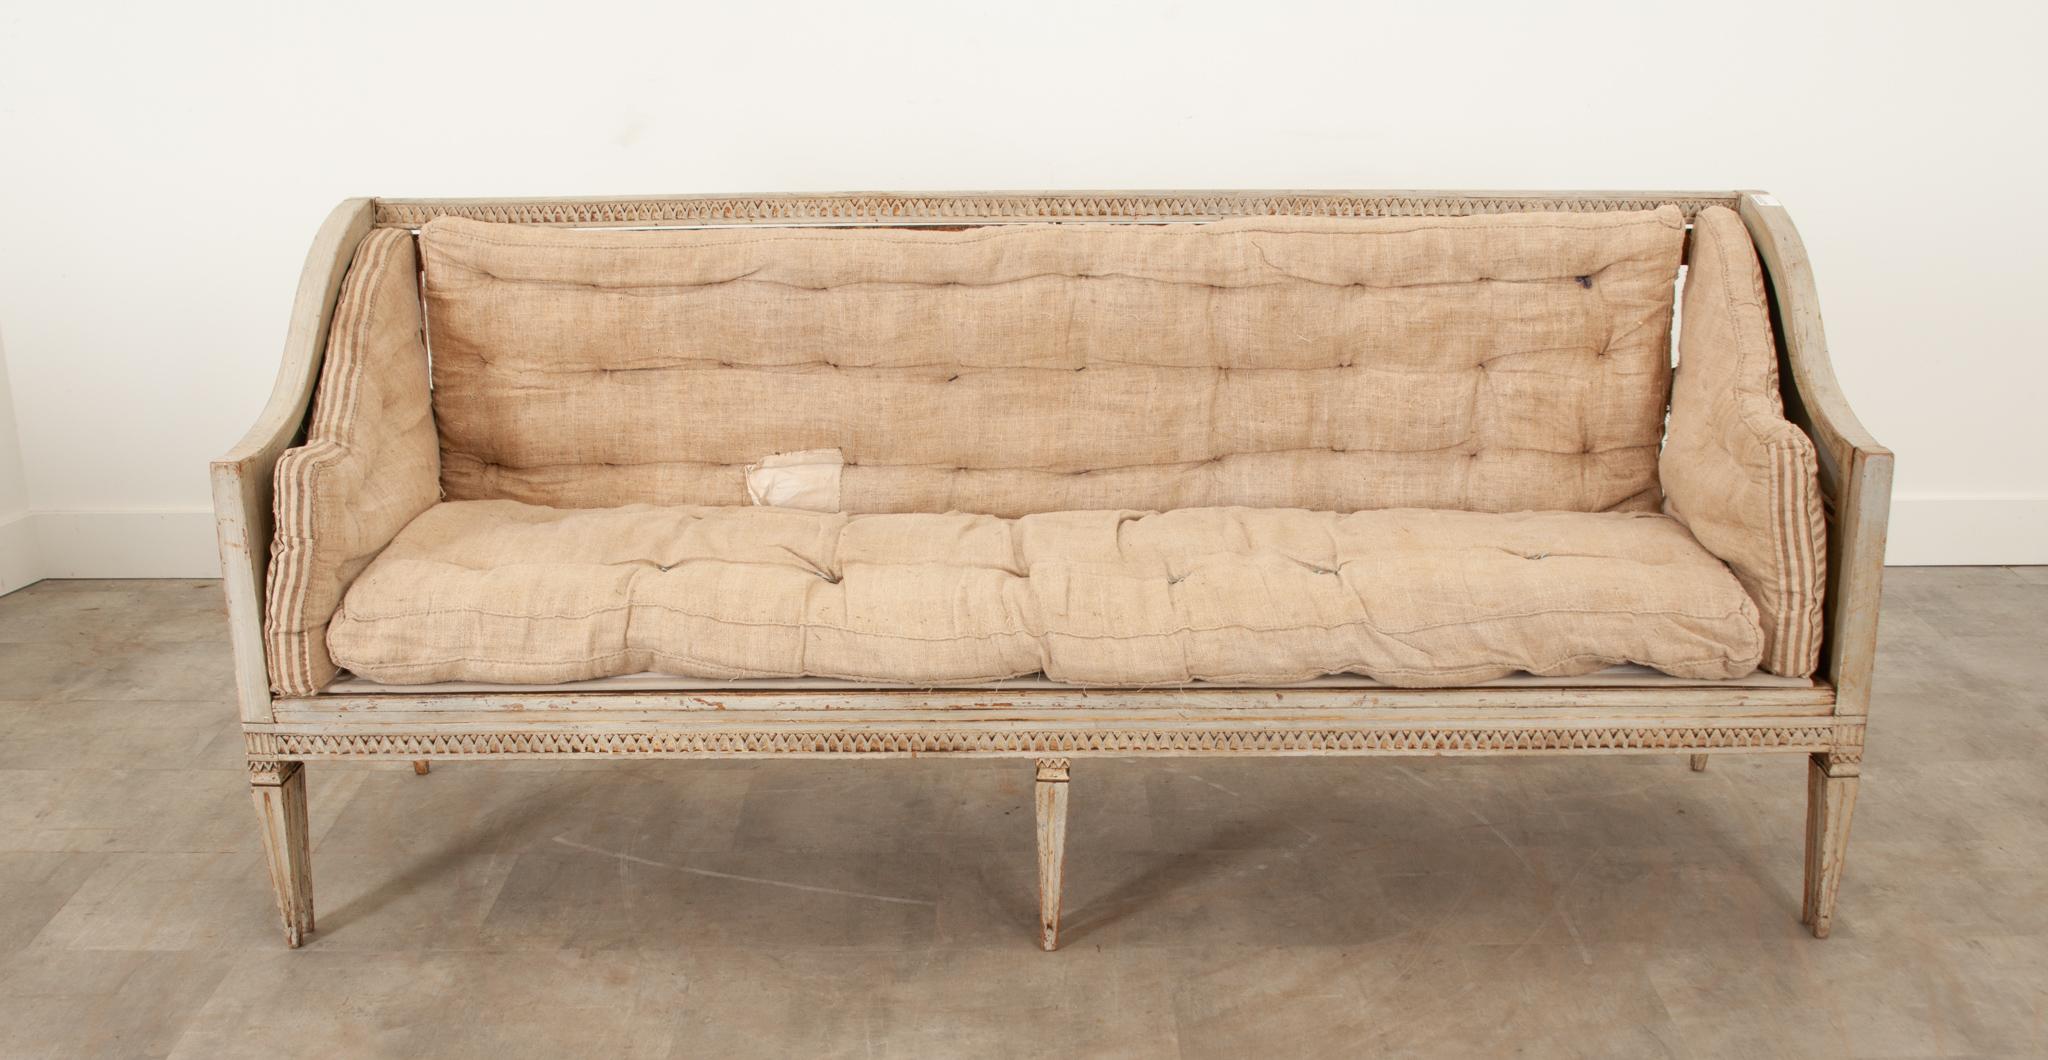 Hand-Crafted Swedish Gustavian Settee Daybed